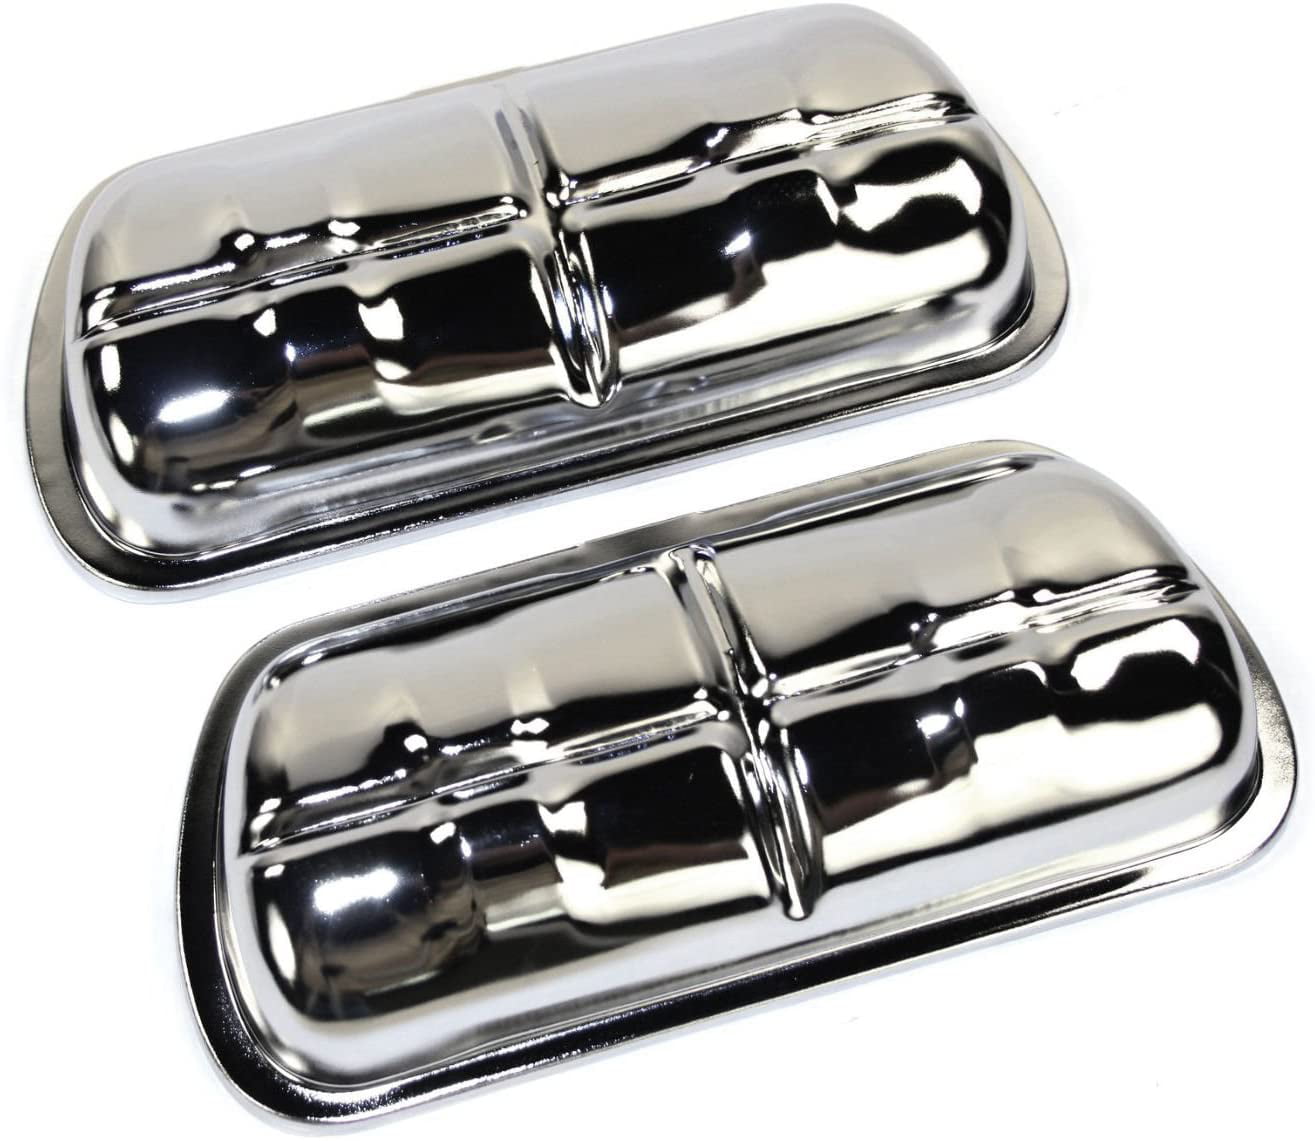 High Lift Clip On Chrome Compatible with Dune Buggy Valve Cover Fits 1500cc & Up VW 